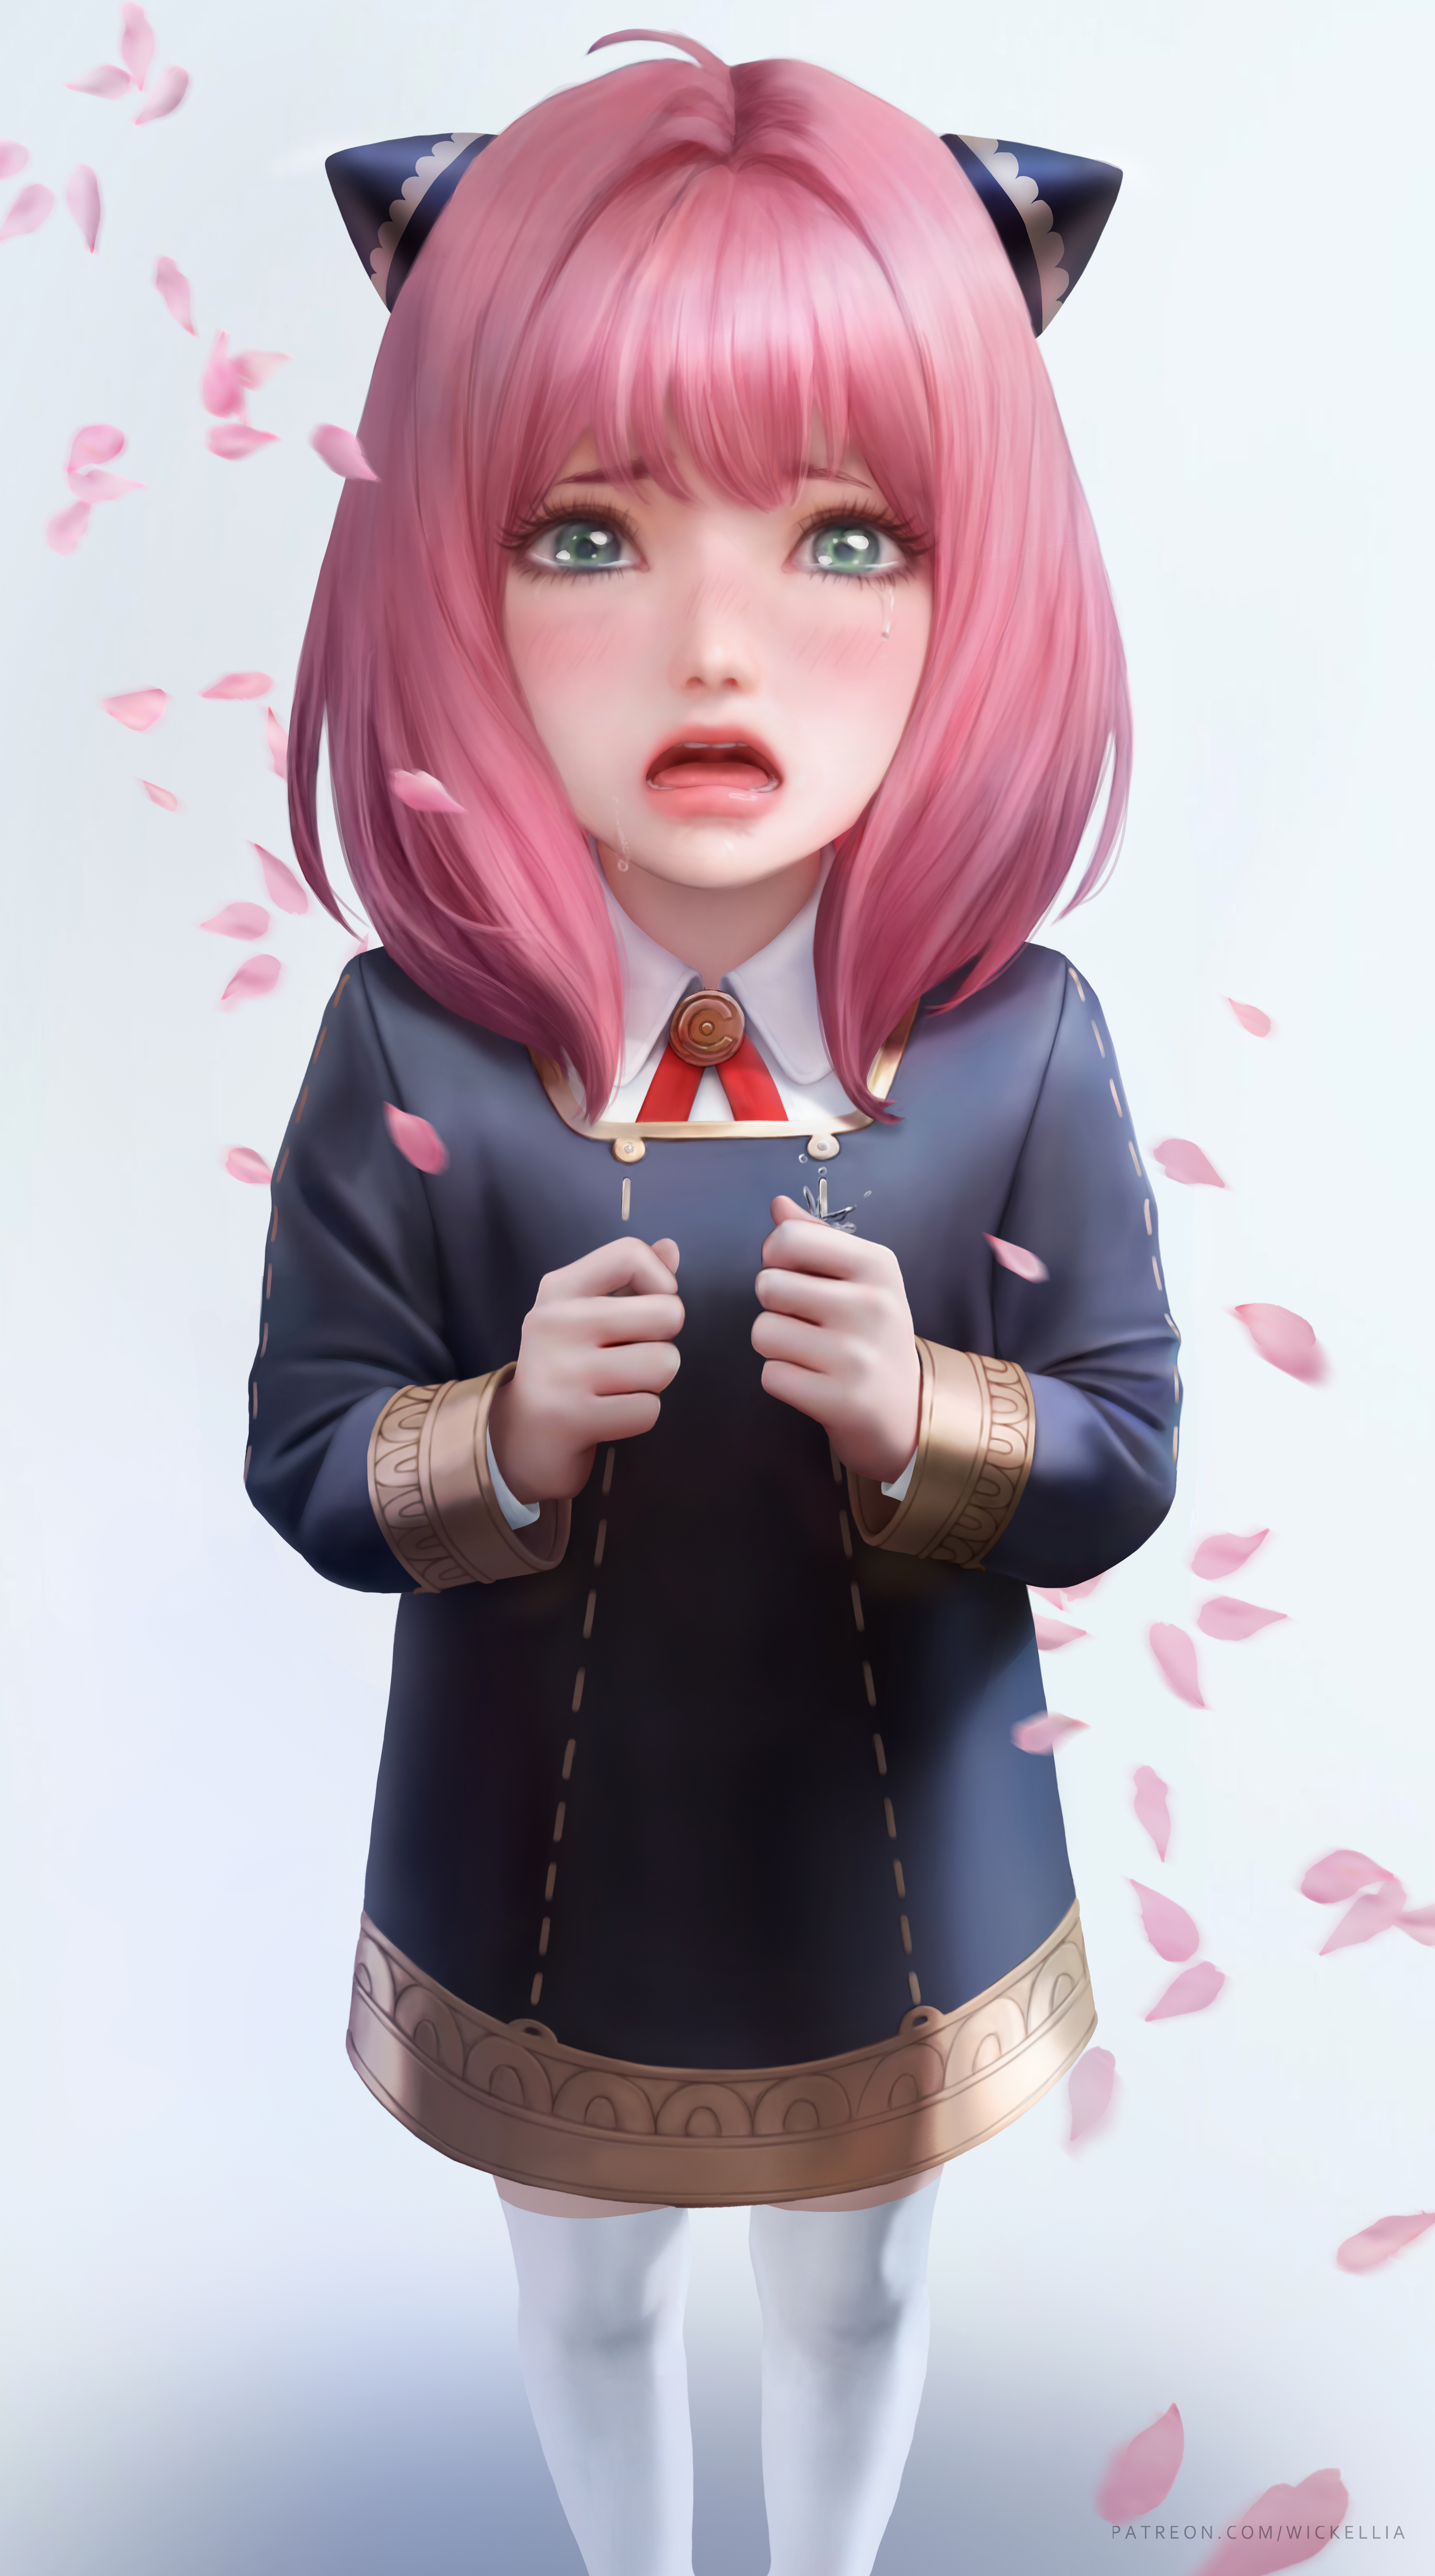 Anime 3900x7000 Anya Forger Spy x Family anime anime girls pink hair cherry blossom crying 2D artwork drawing fan art Wickellia